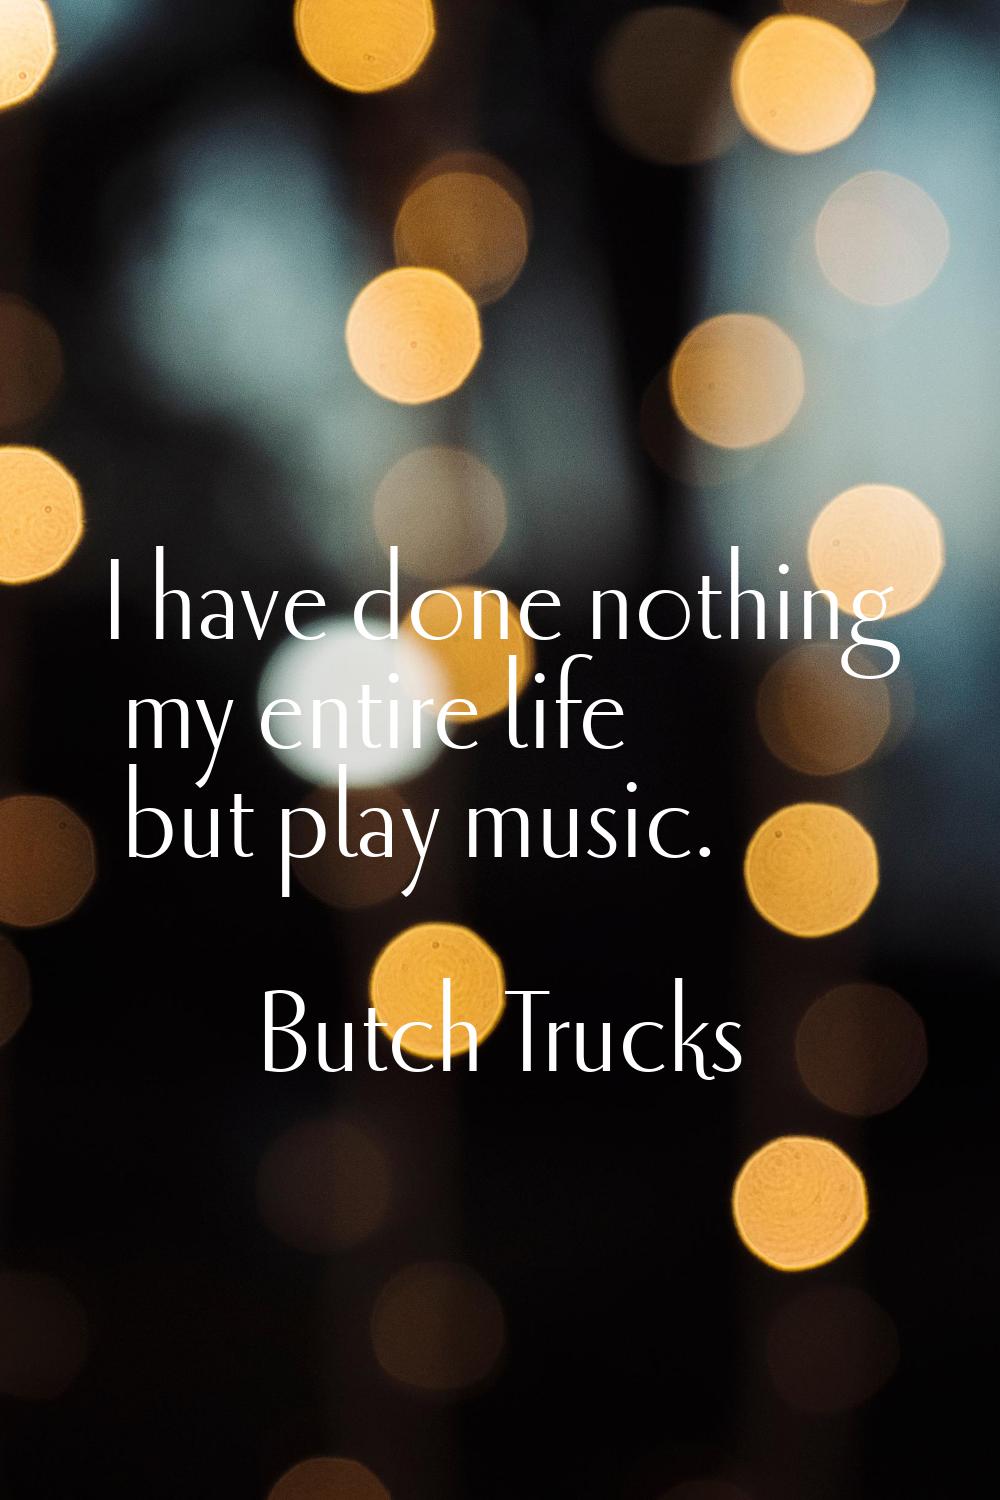 I have done nothing my entire life but play music.